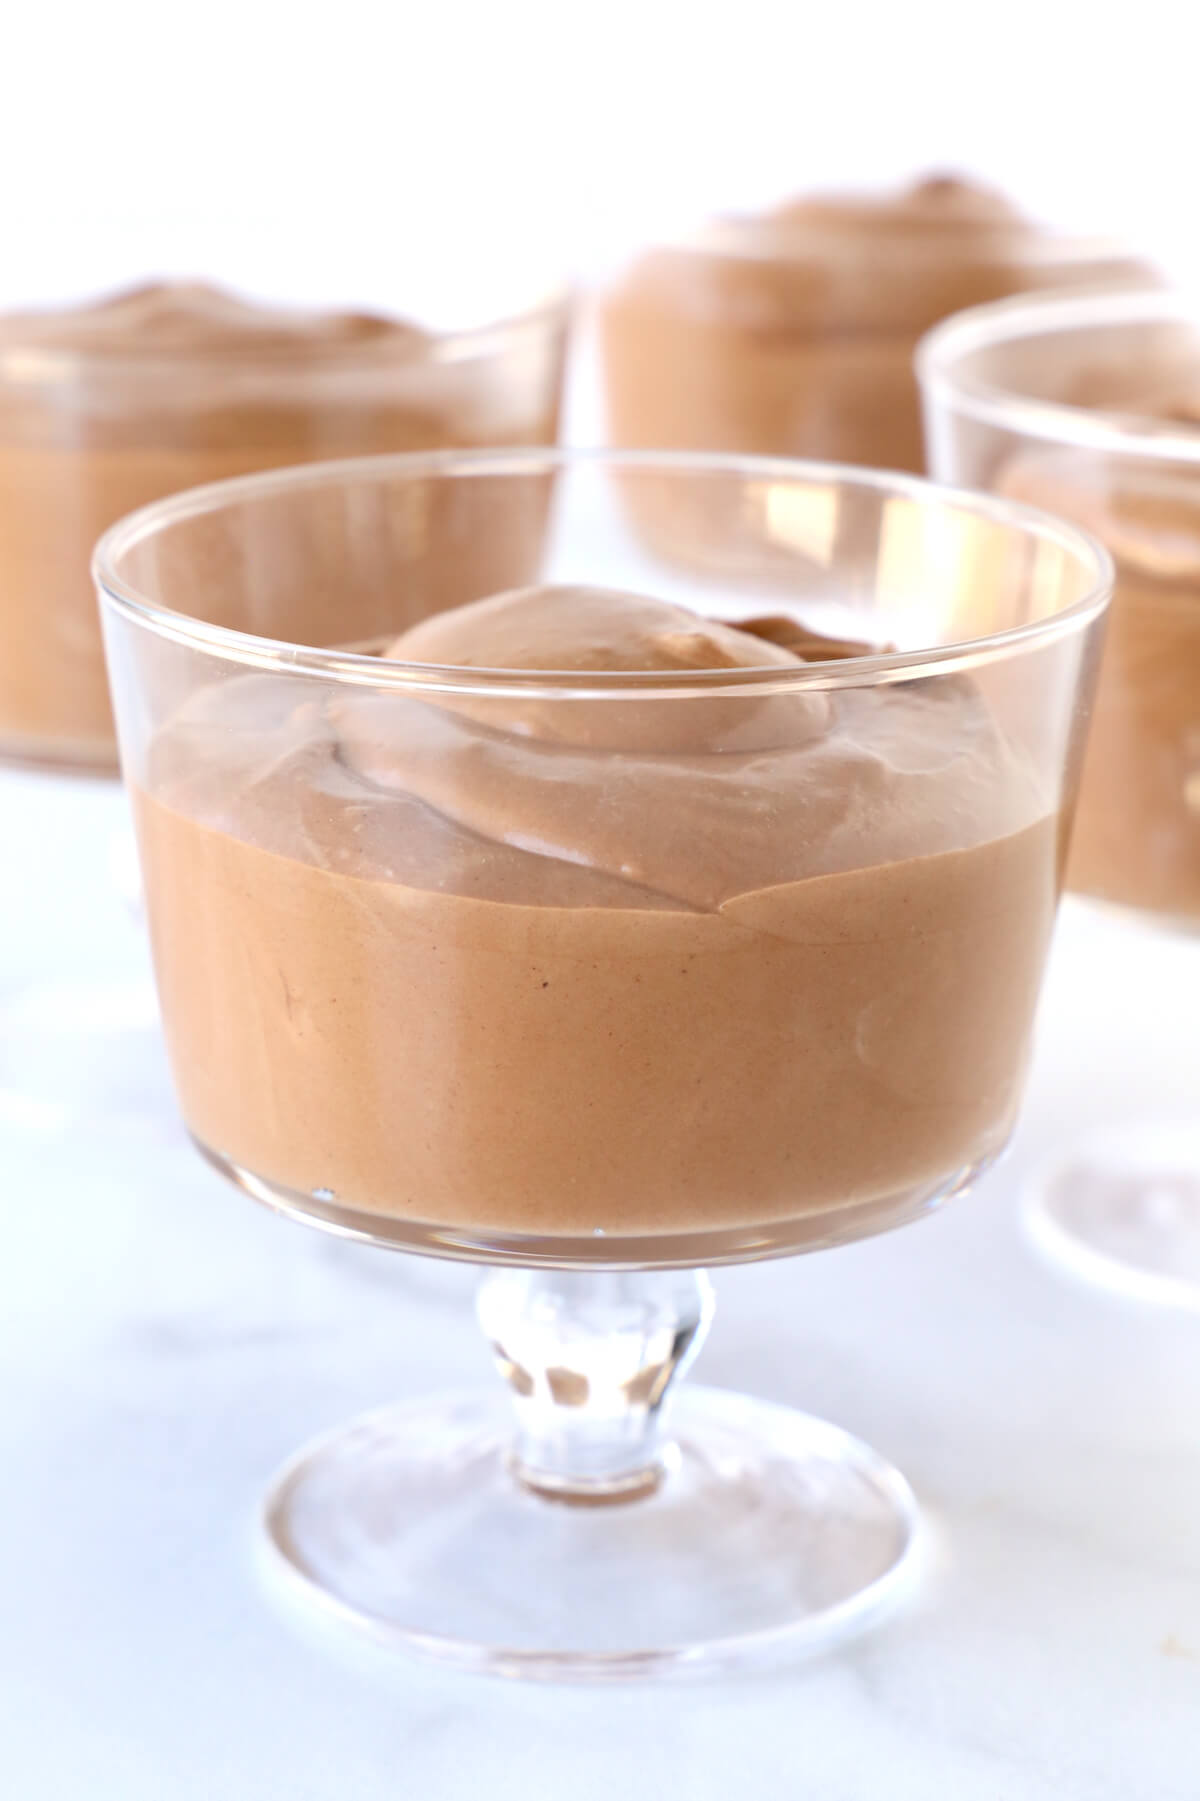 A glass bowl filled with chocolate mousse.